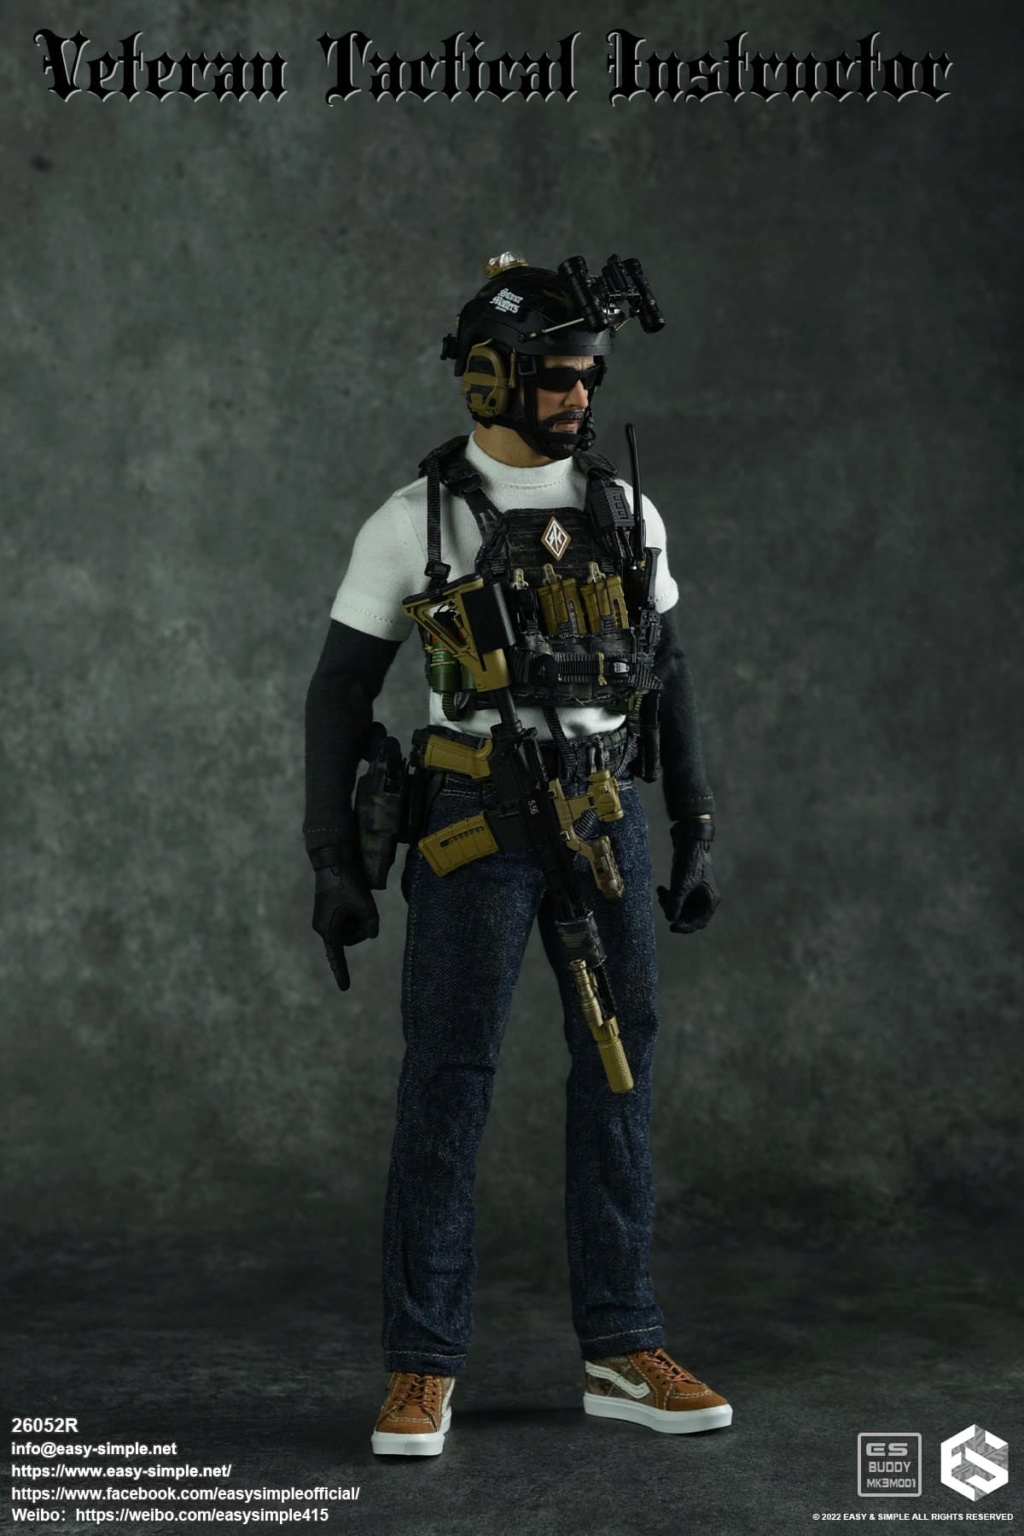 easy - NEW PRODUCT: Easy&Simple: 26052R 1/6 Scale Veteran Tactical Instructor 31158510